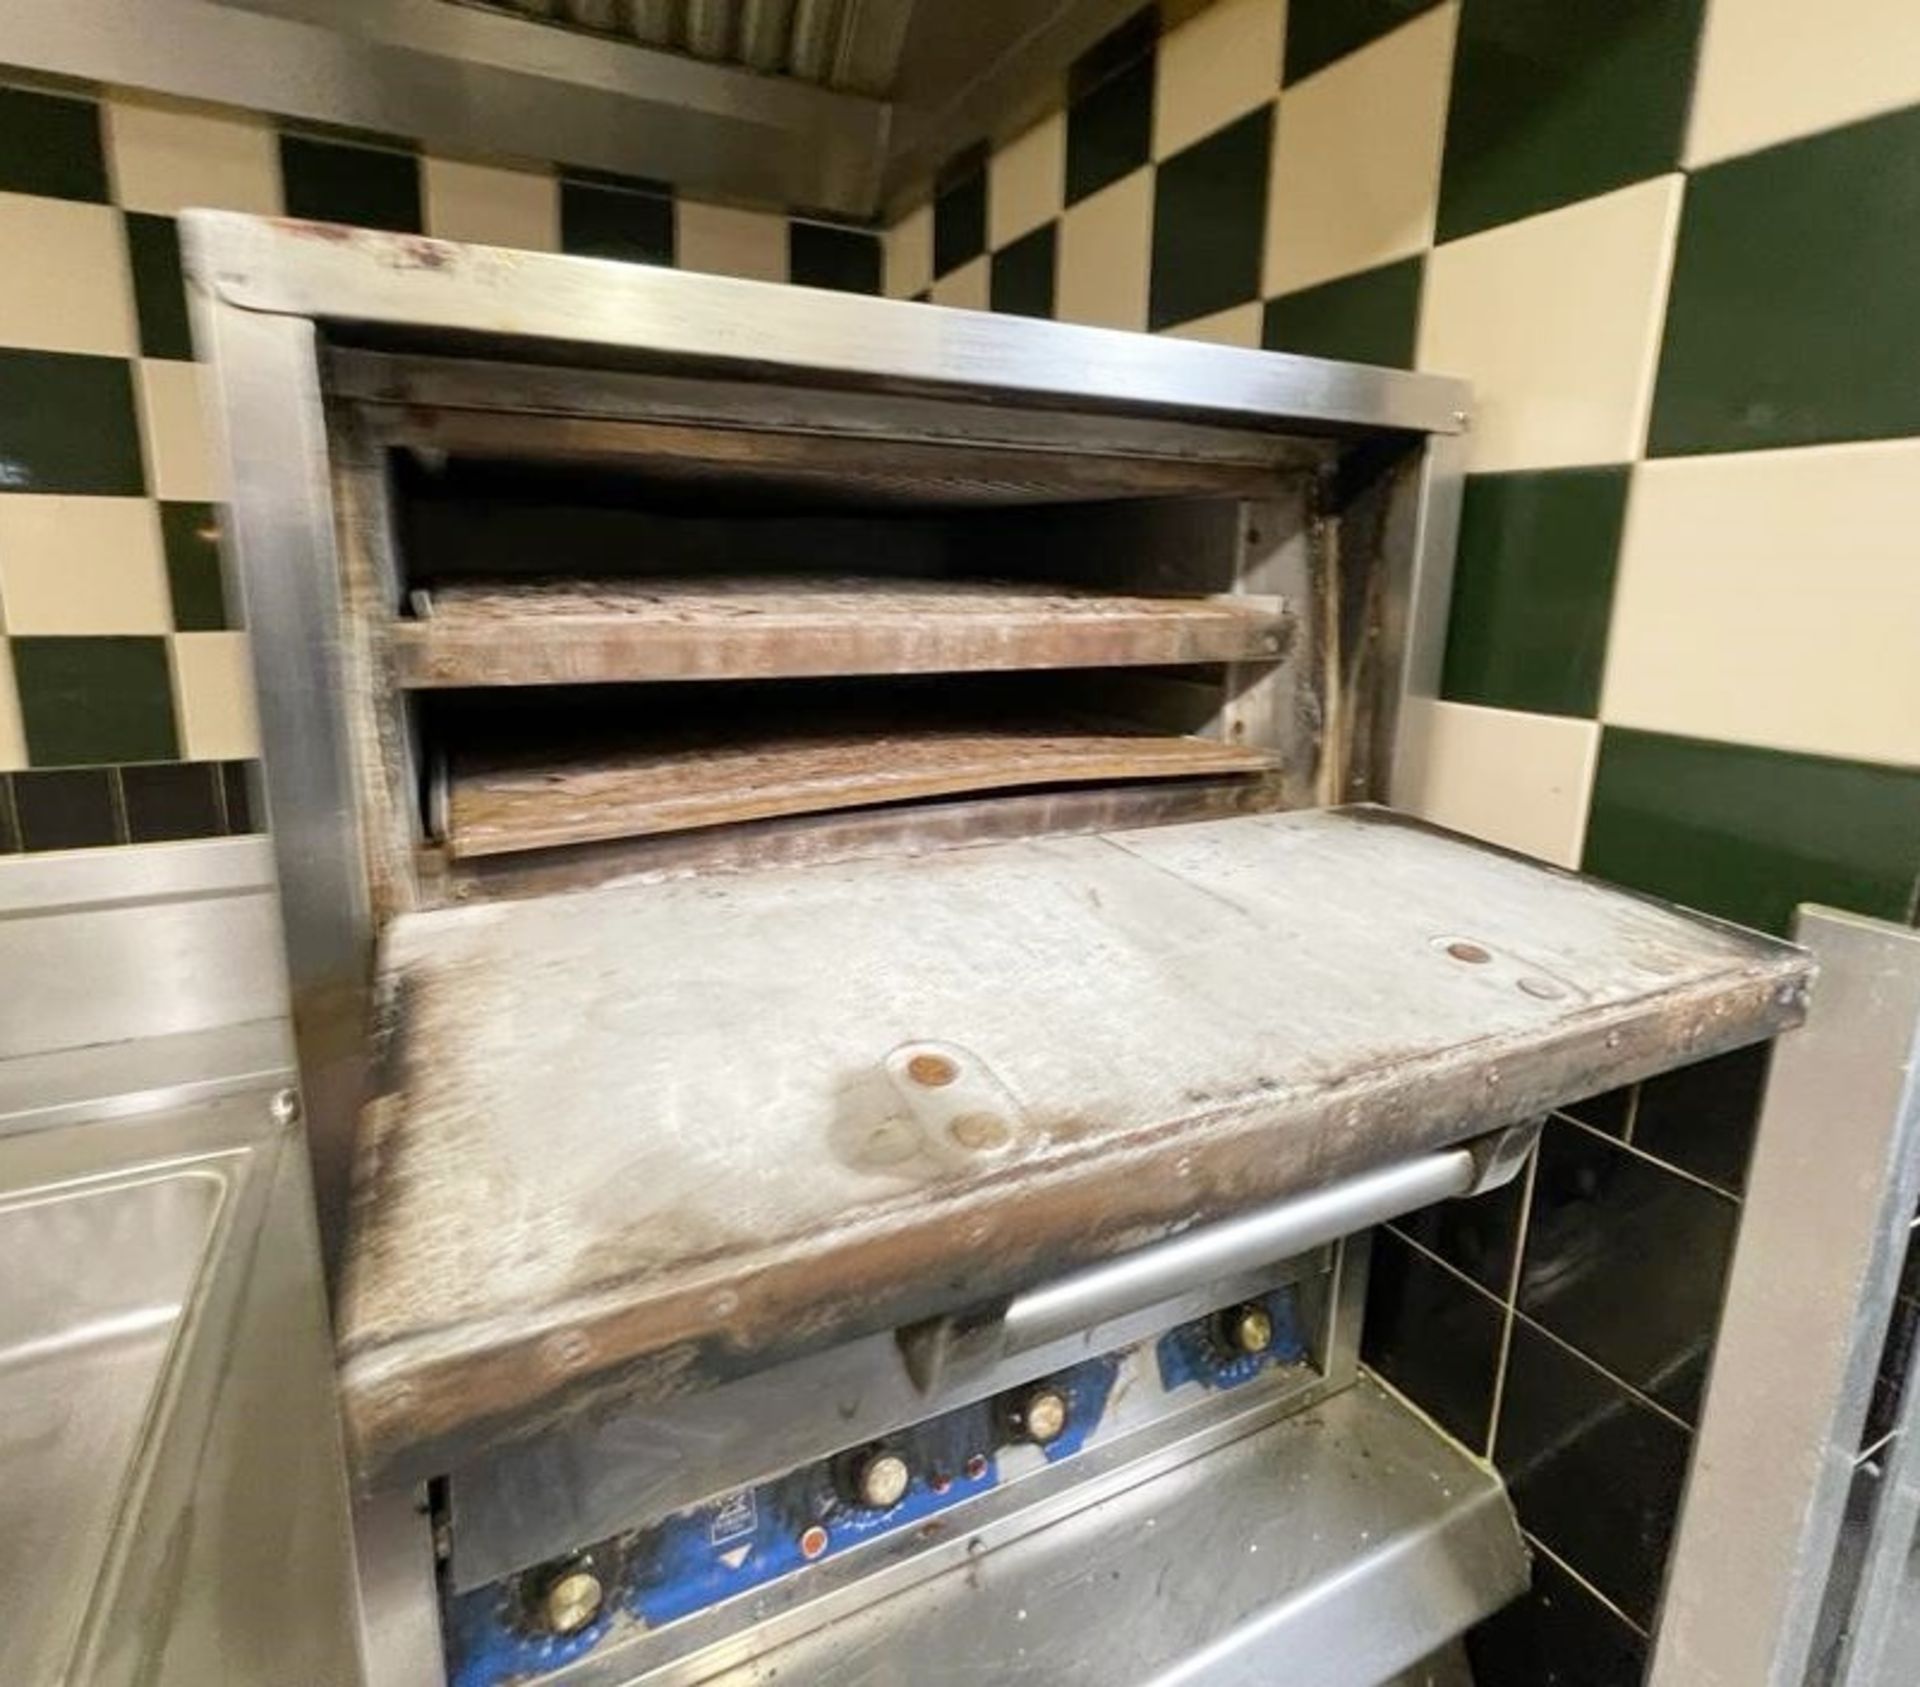 1 x Bakers Pride Three Deck Commercial Electric Pizza Oven - CL819 - Location: Altrincham - Image 2 of 5